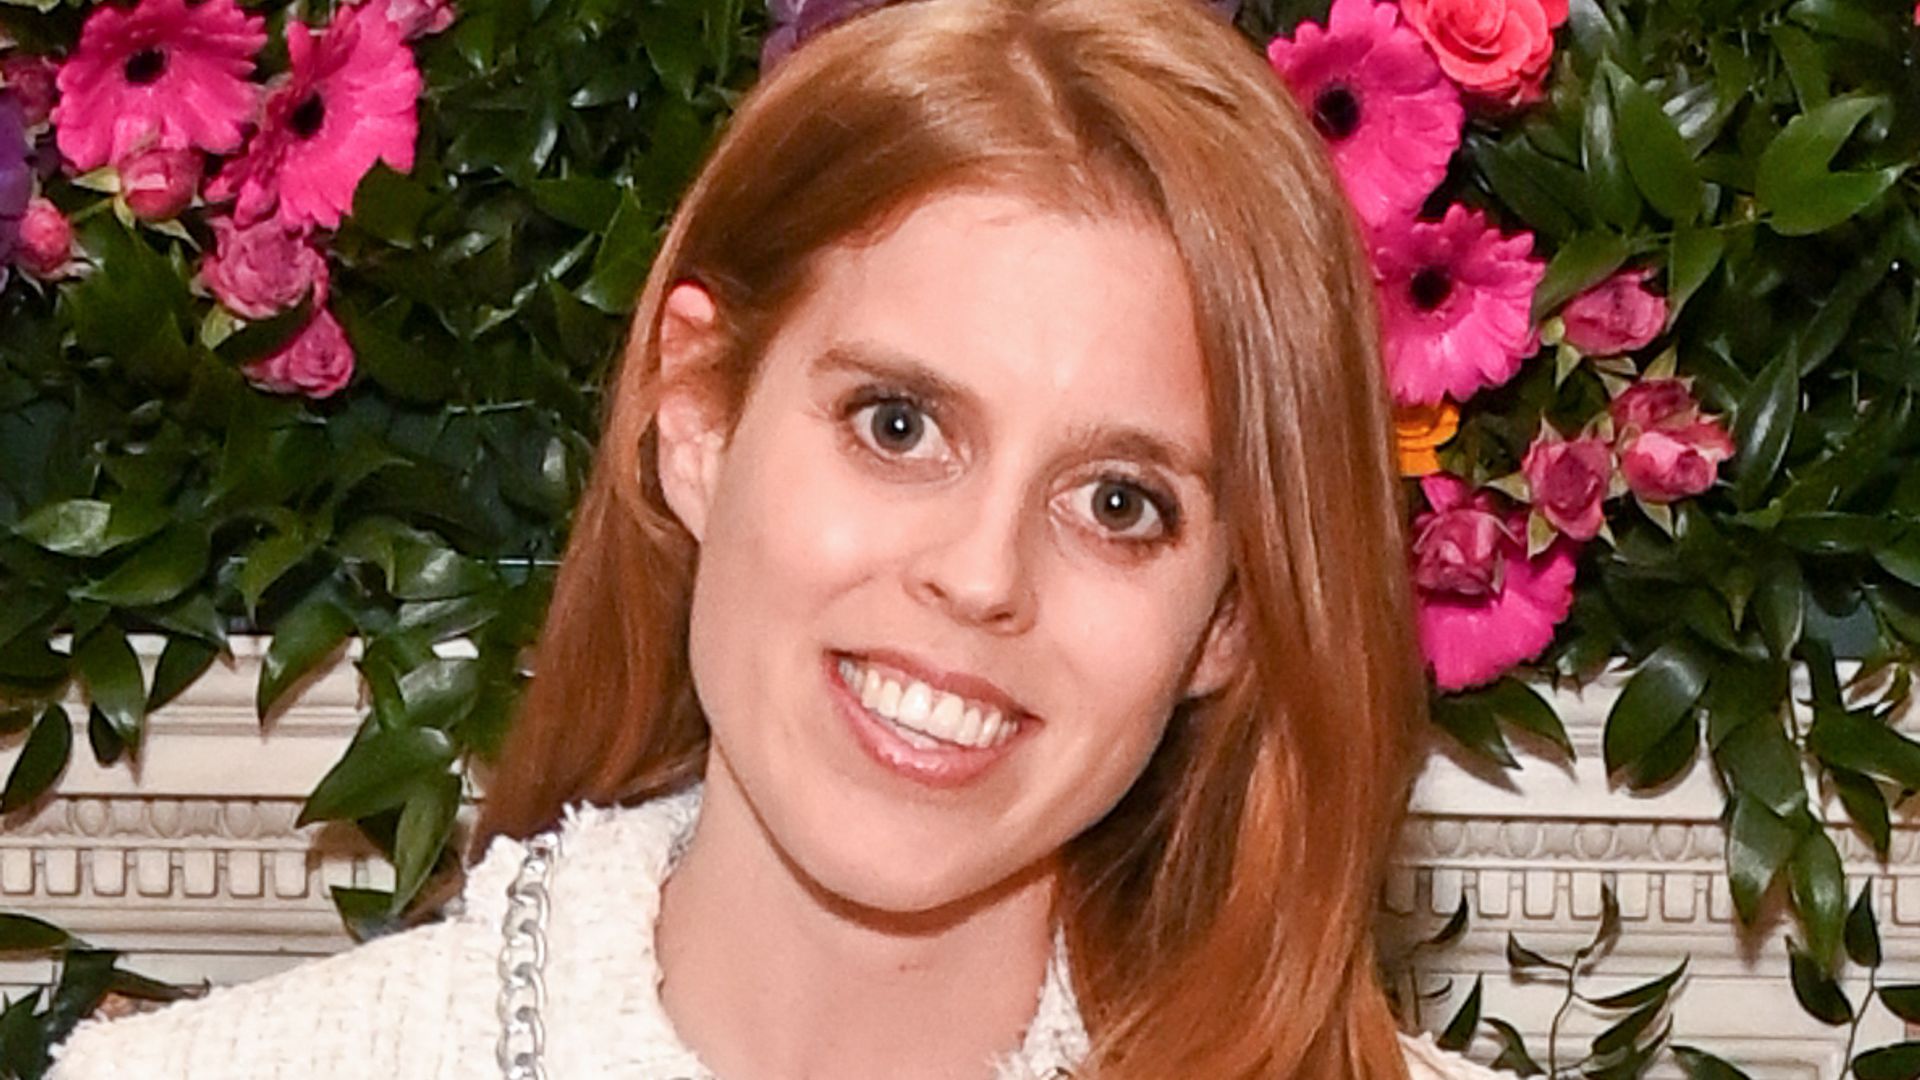 Princess Beatrice in a white skirt against a backdrop of flowers